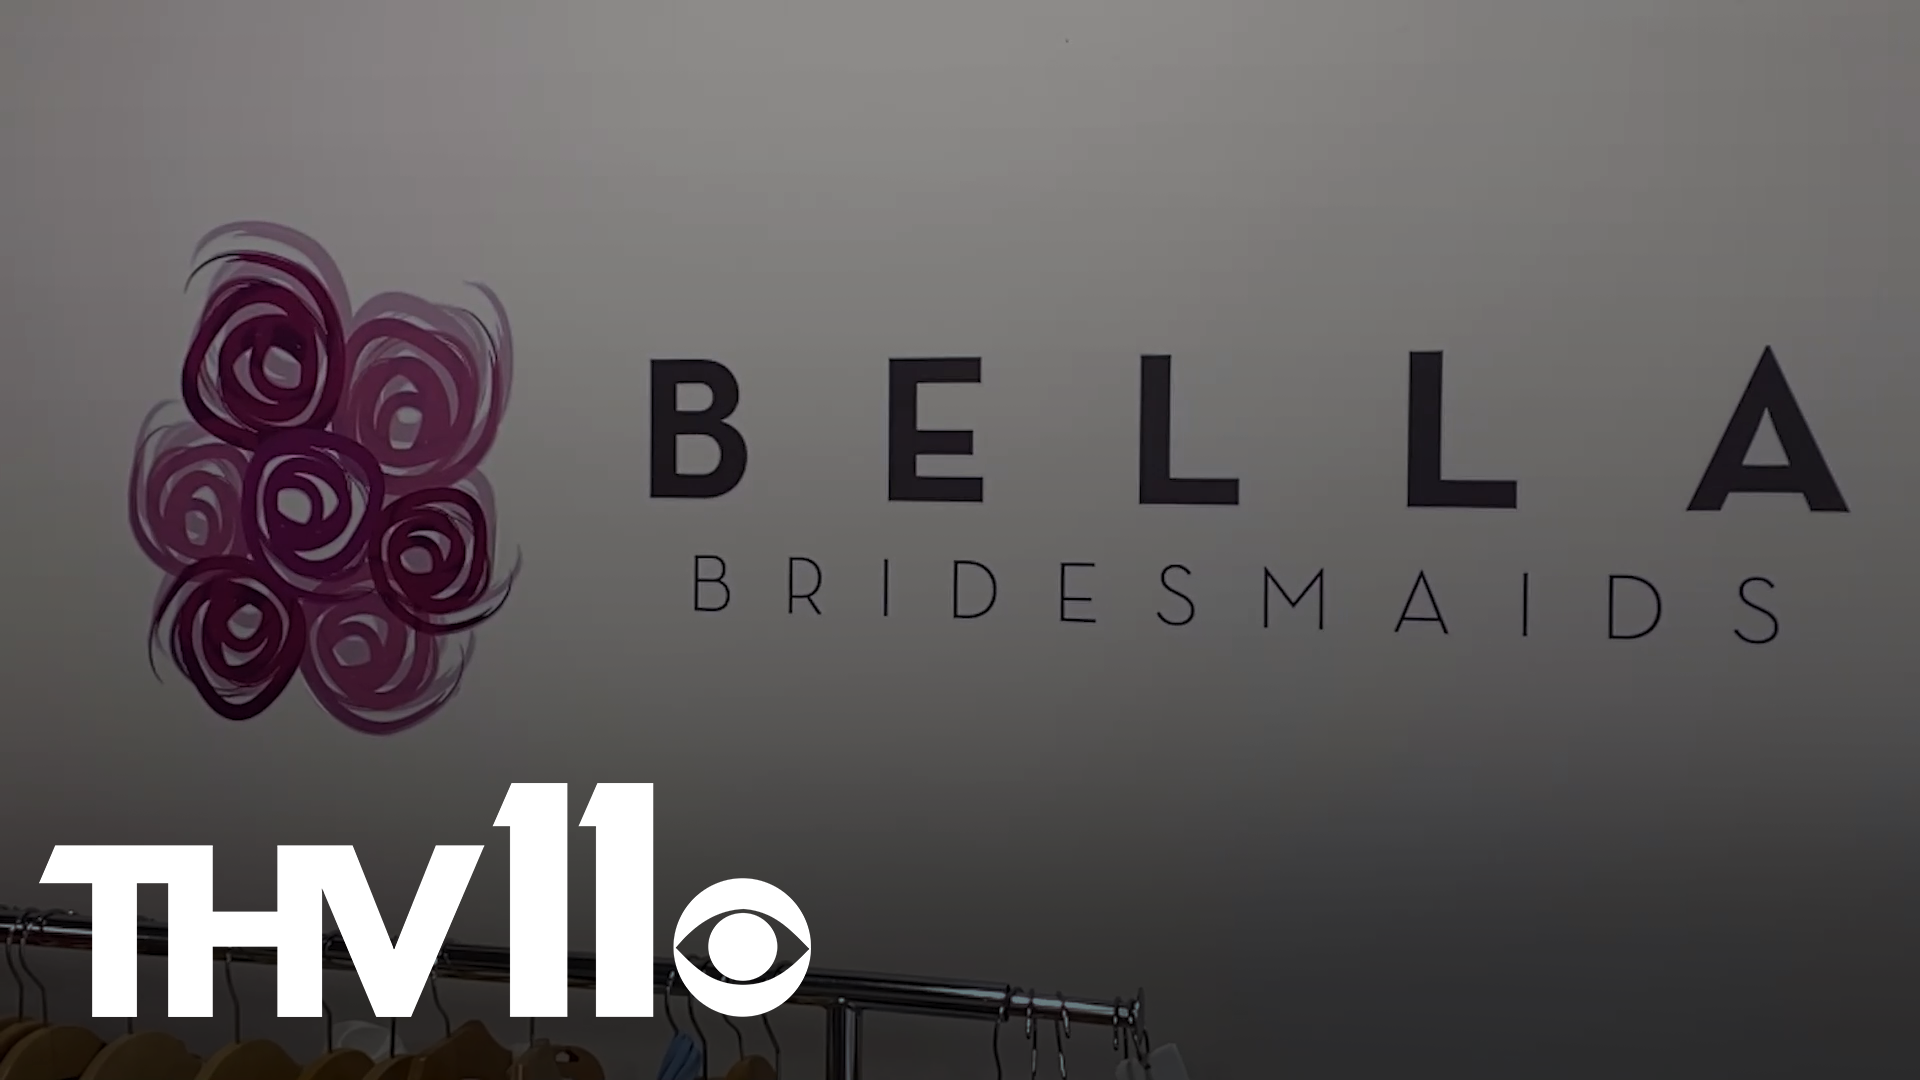 We're taking a look at the latest bridesmaids trends at Bella's Bridesmaids on Cantrell!